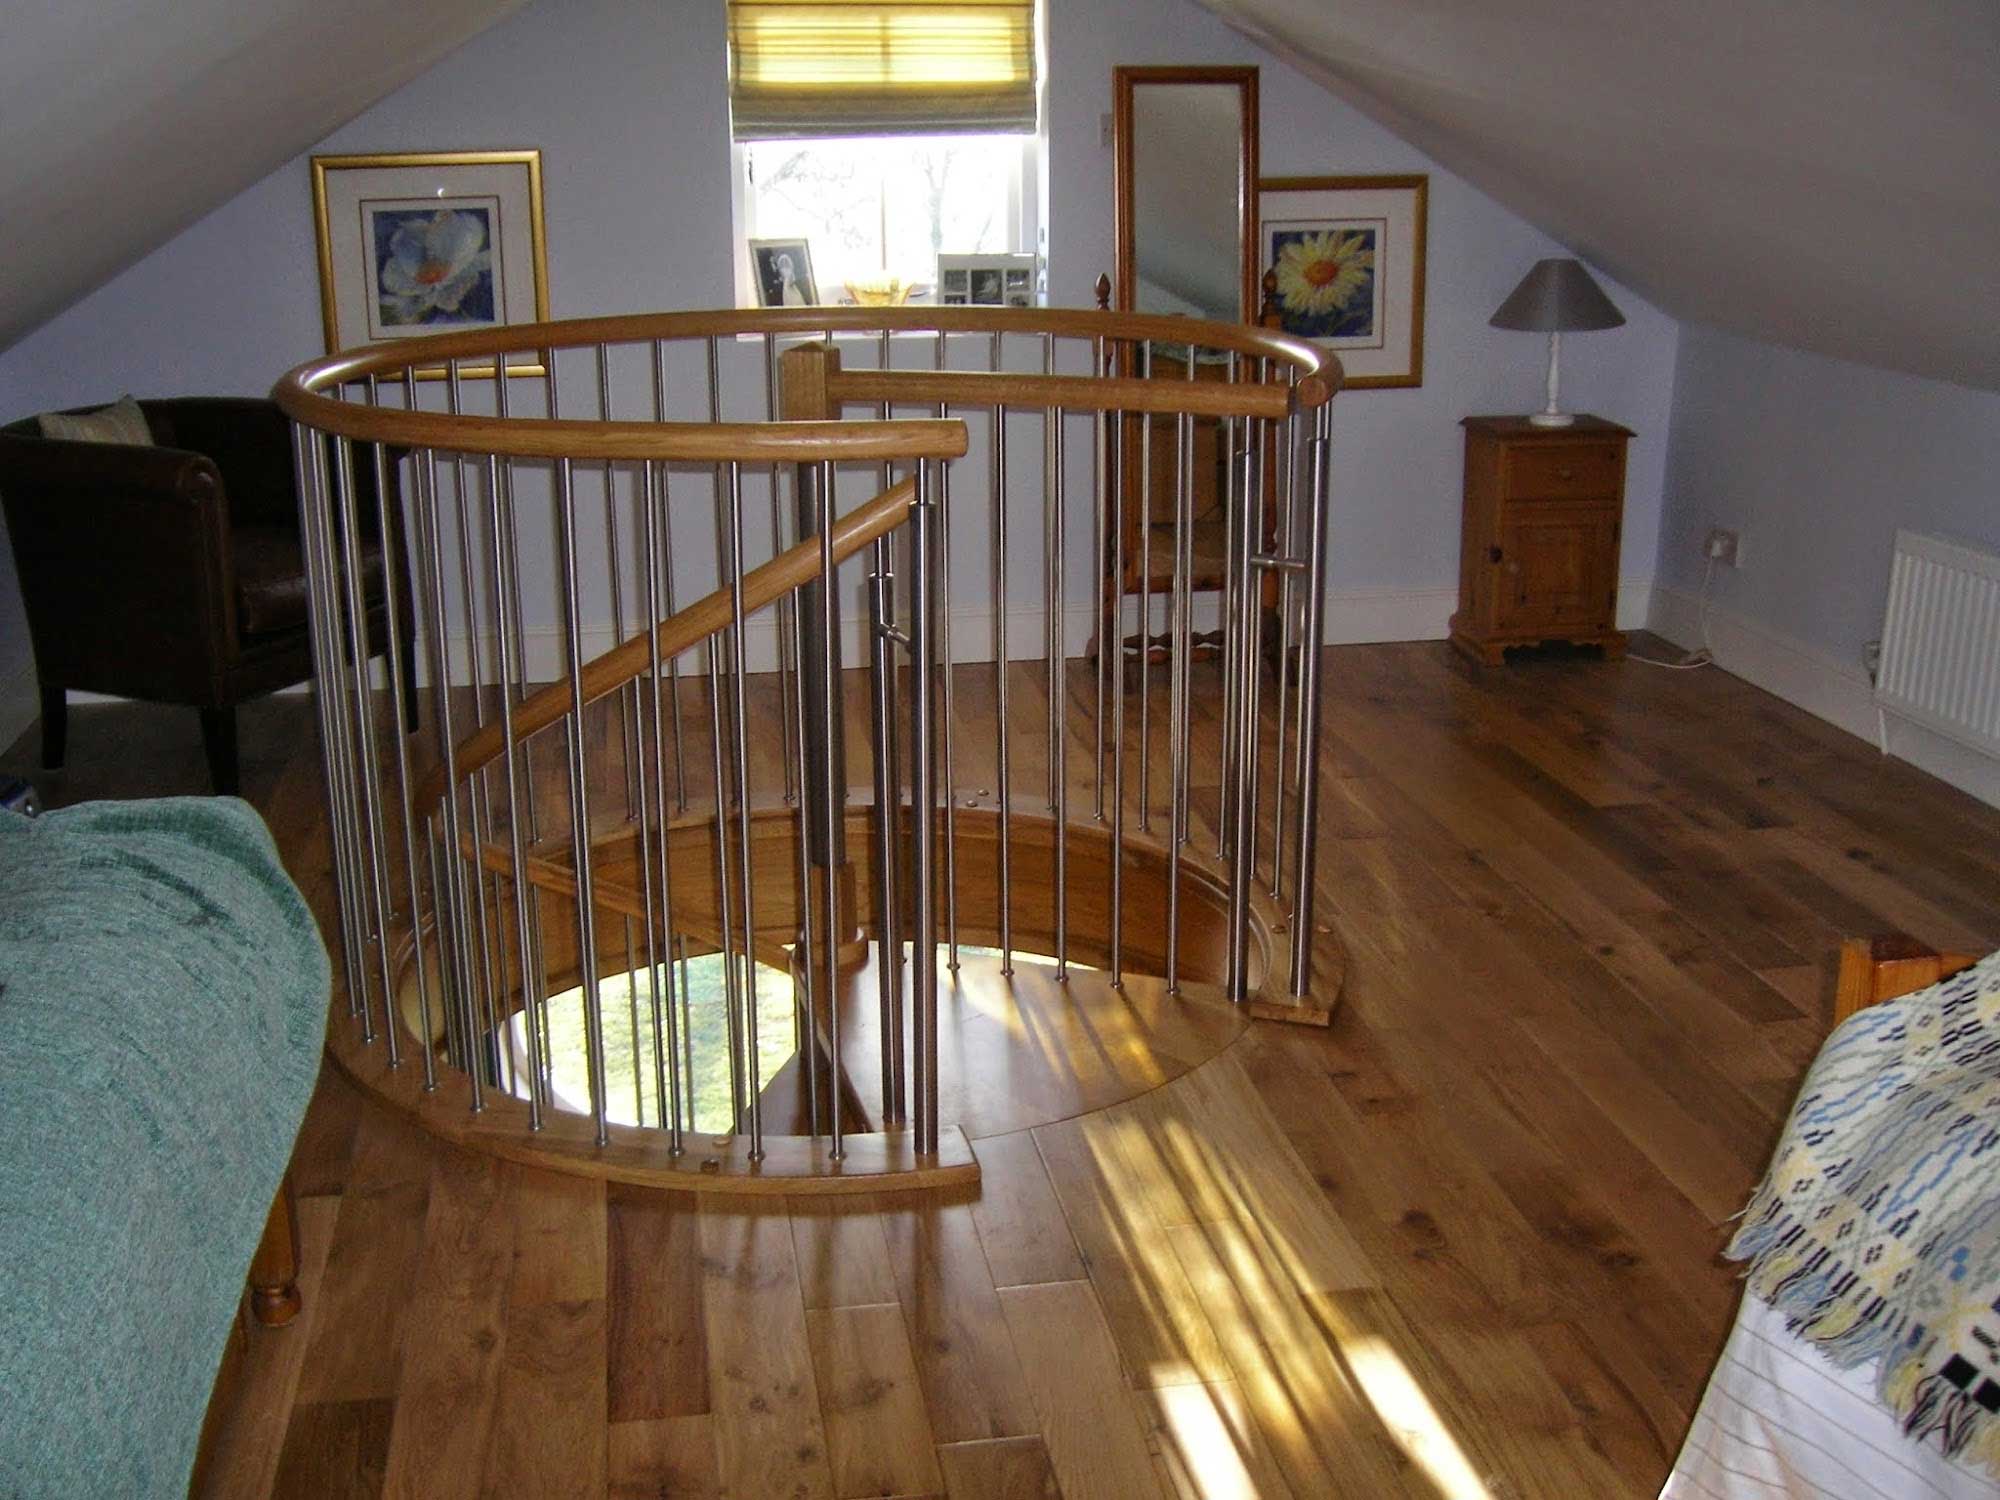 E Augustus Bespoke Furniture & Joinery spiral staircase